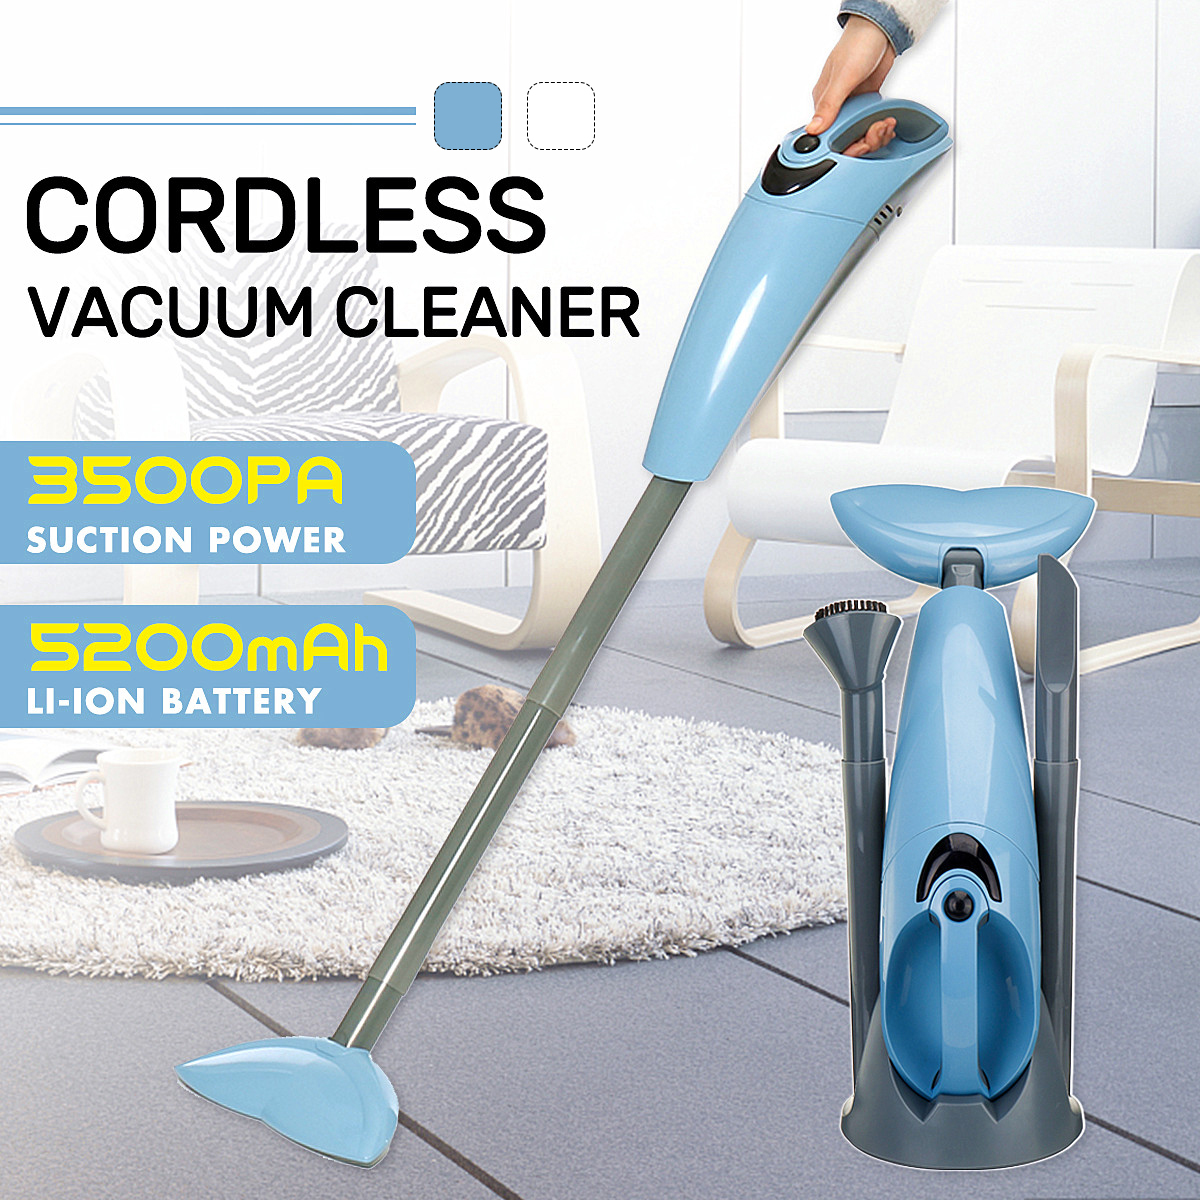 100W-Handheld-Wireless-Convenience-Rechargeable-Household-Car-Vaccum-Cleaner-1434321-1